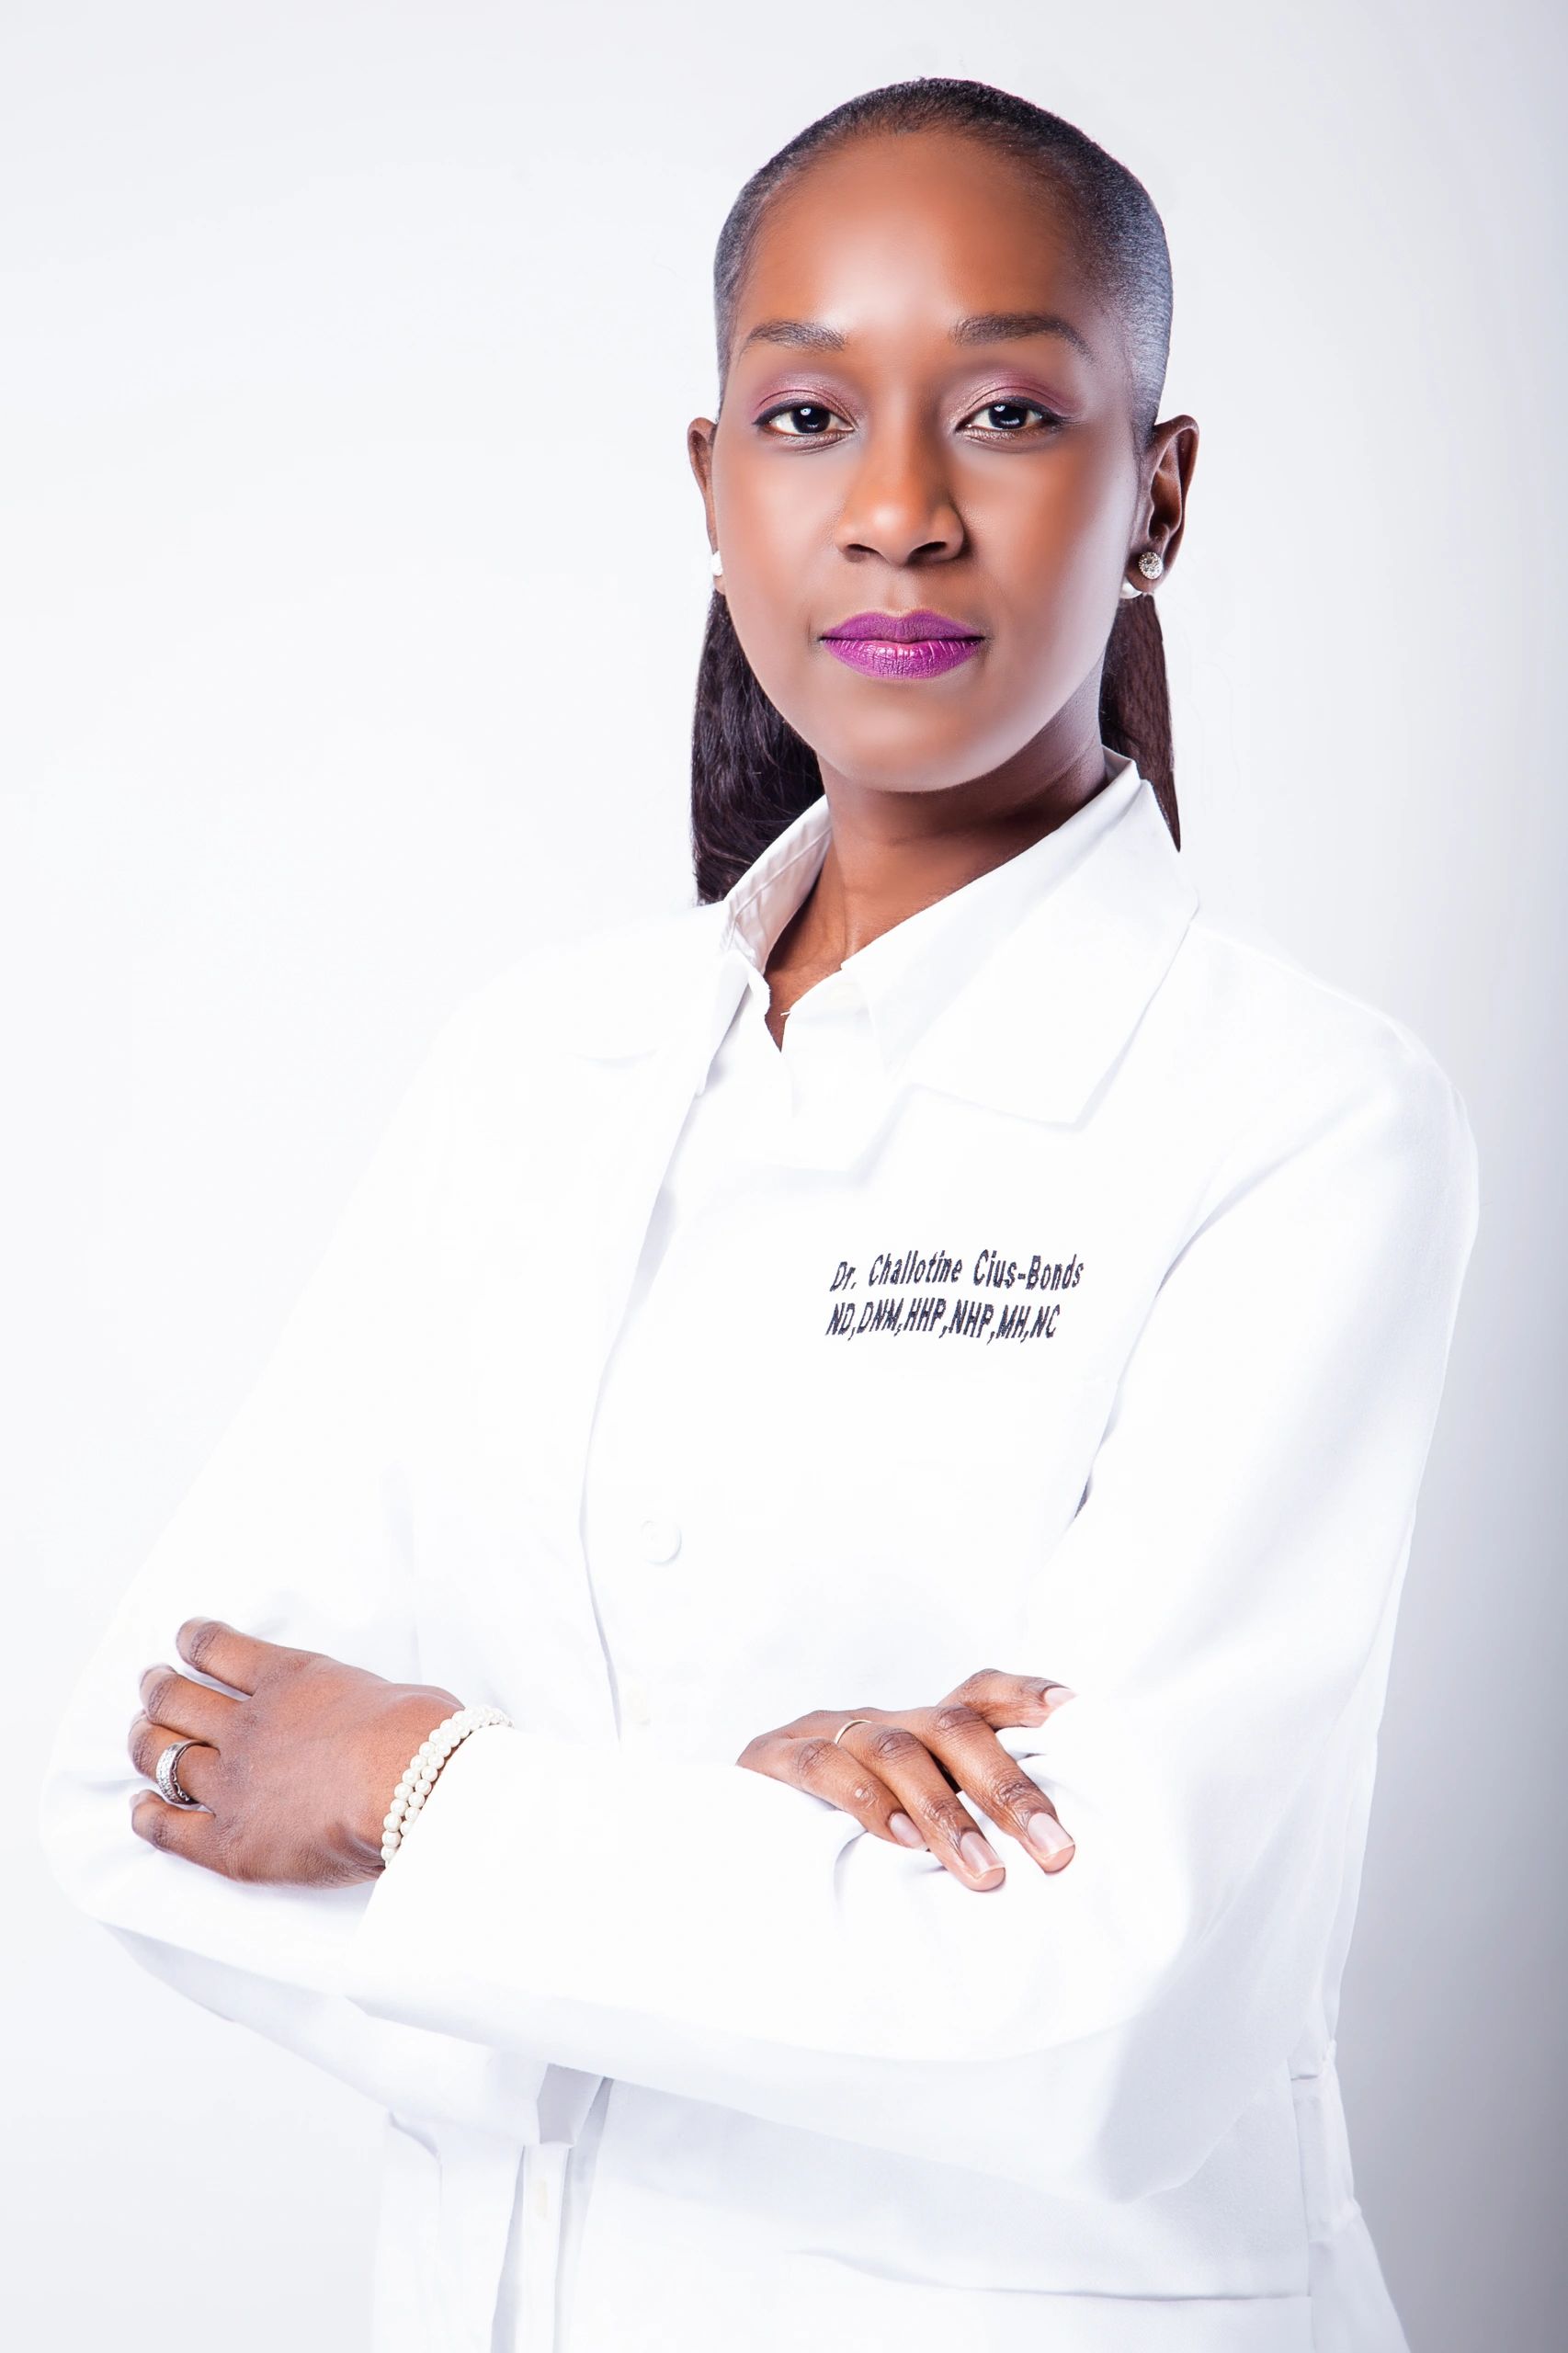 Dr. Challotine Cius-Bonds, ND, DNM, HHP, NHP, NC,Ph.D Natural and Integrative Health Practitioner